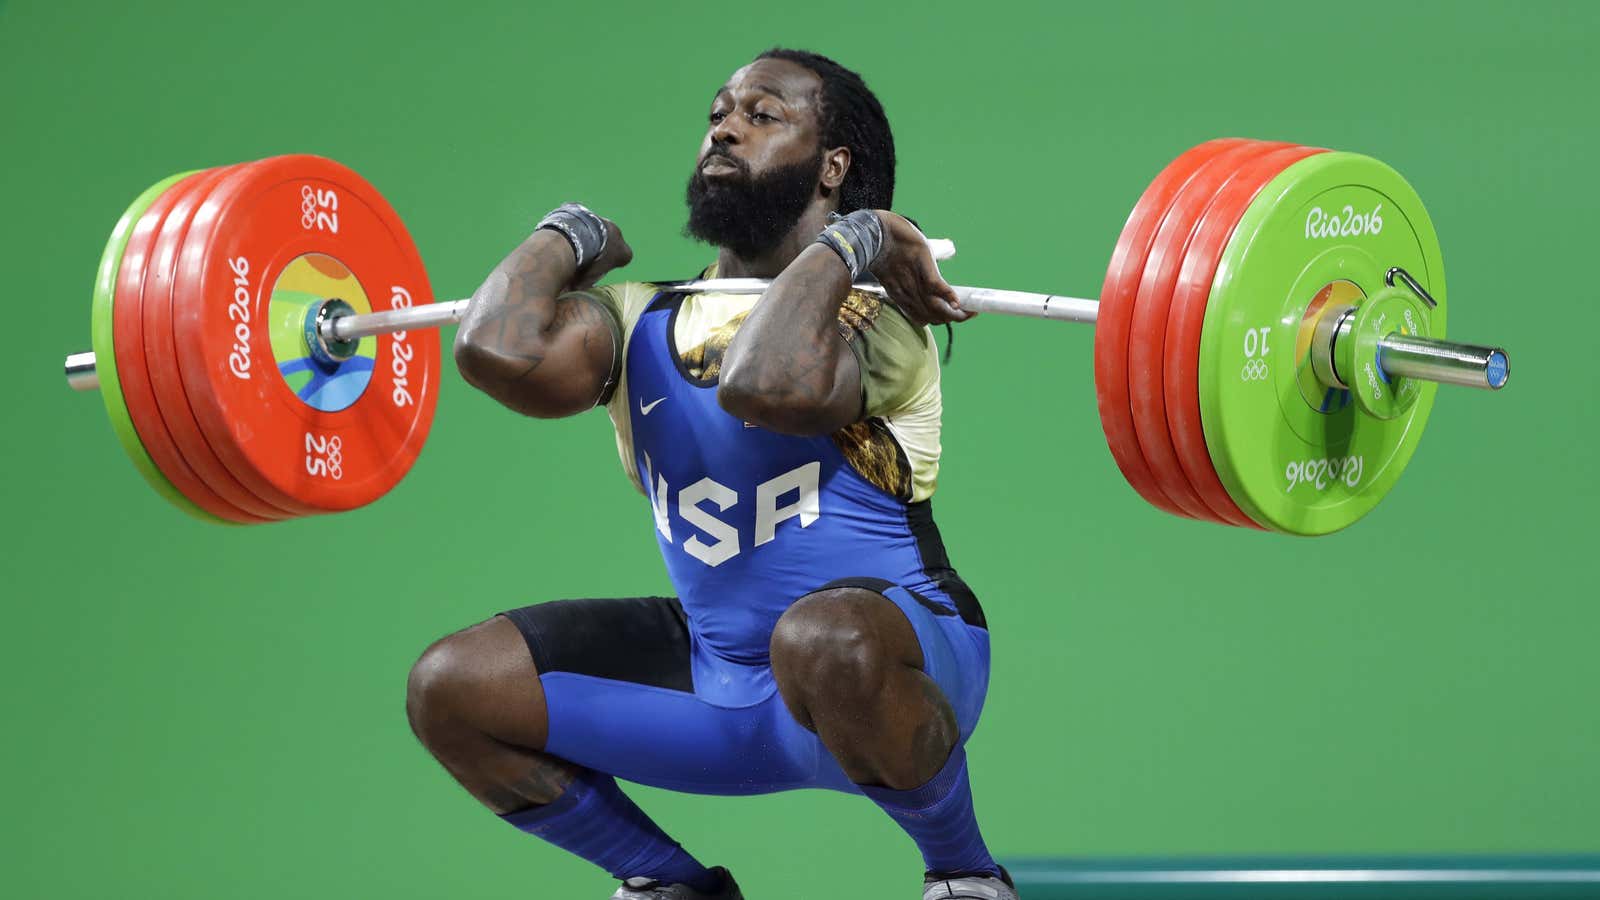 Kendrick Farris proves you can be vegan and a world-class weightlifter.